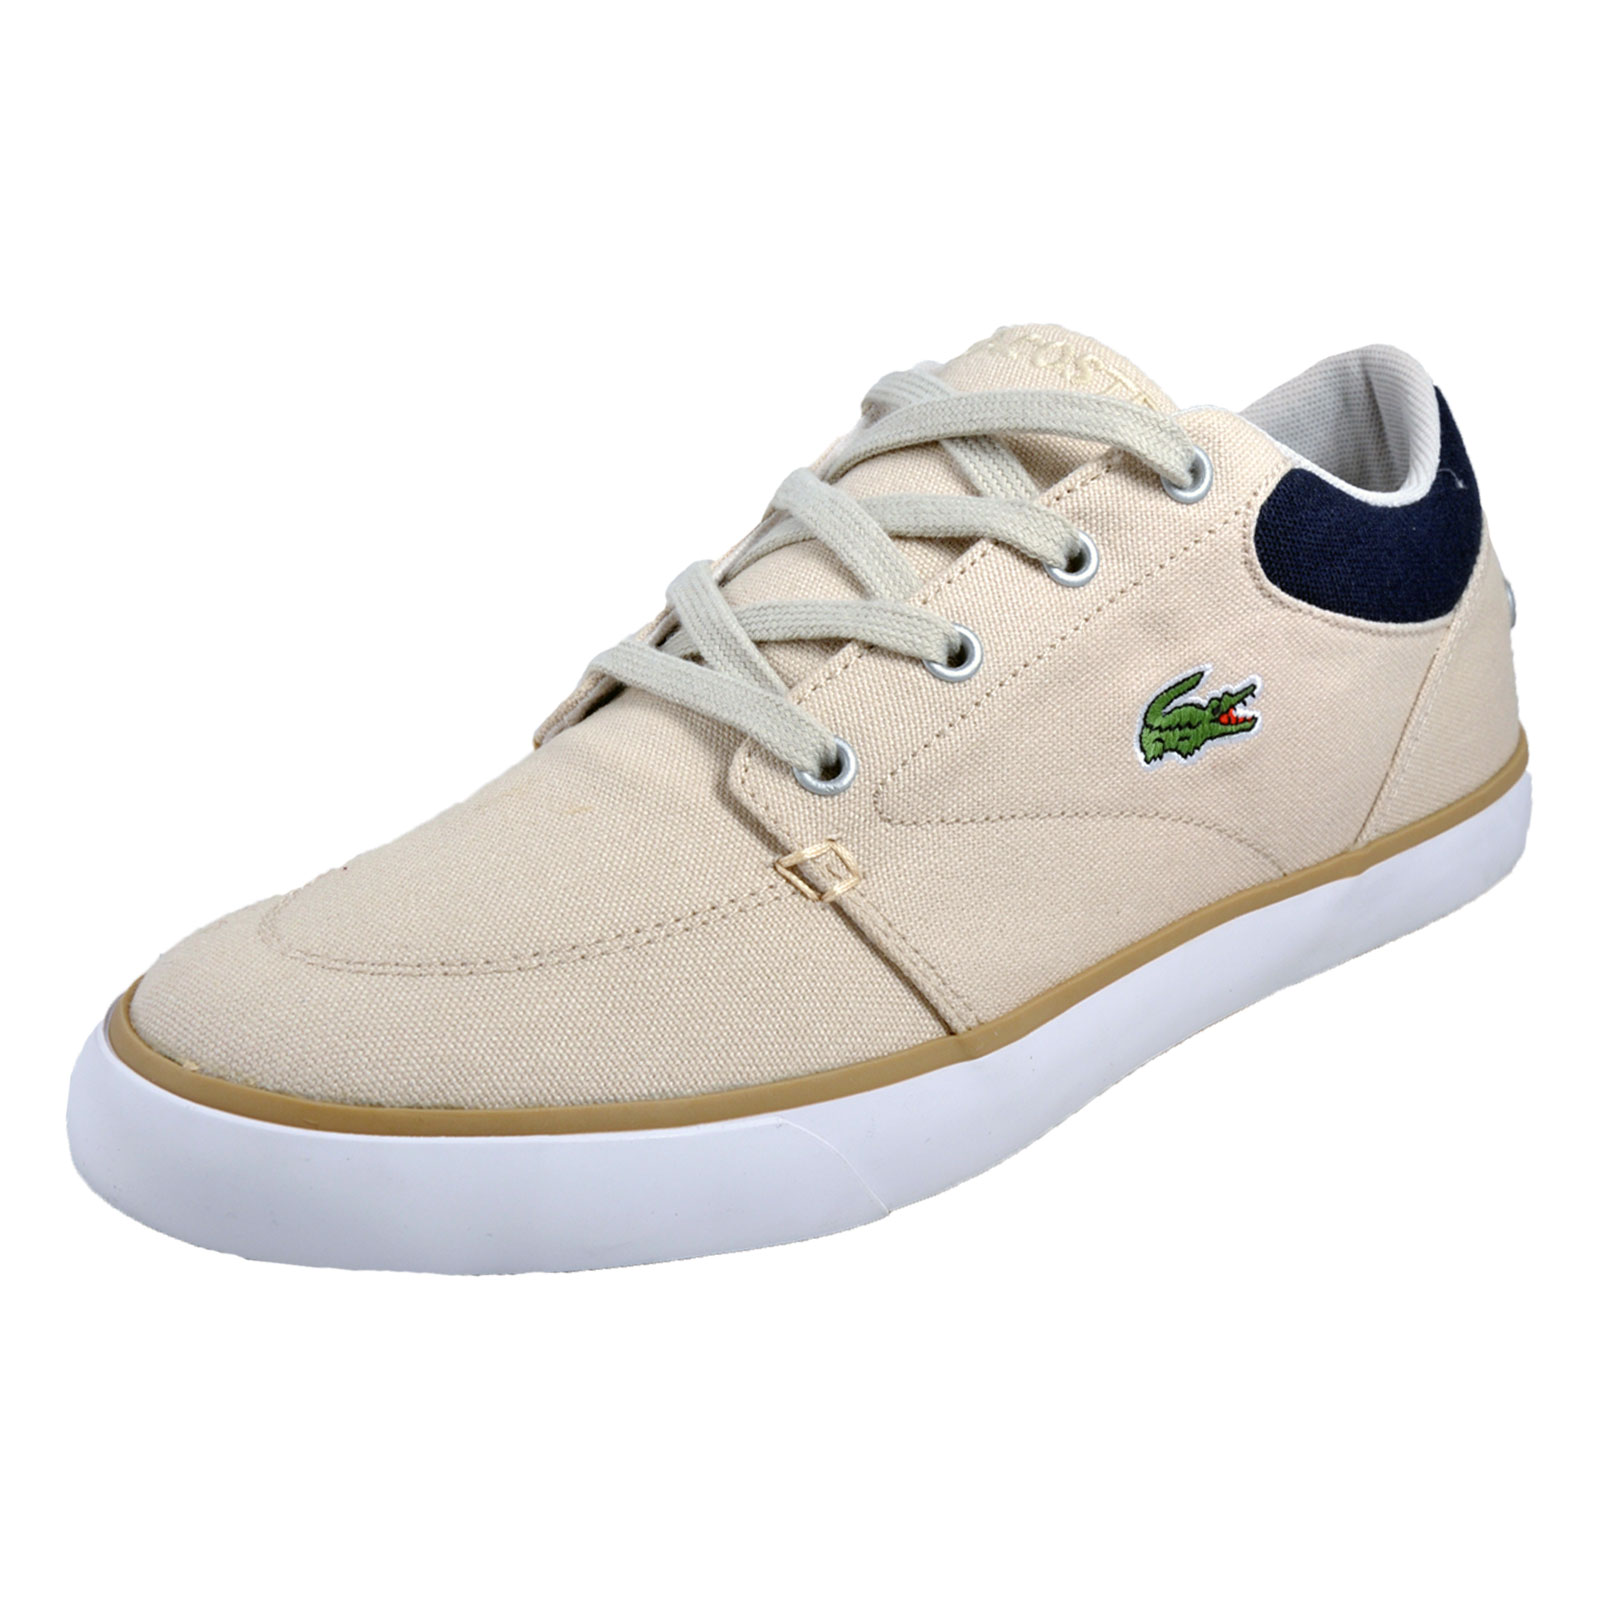 Lacoste Bayliss 116 Mens Designer Canvas Classic Casual Trainers Stone ...